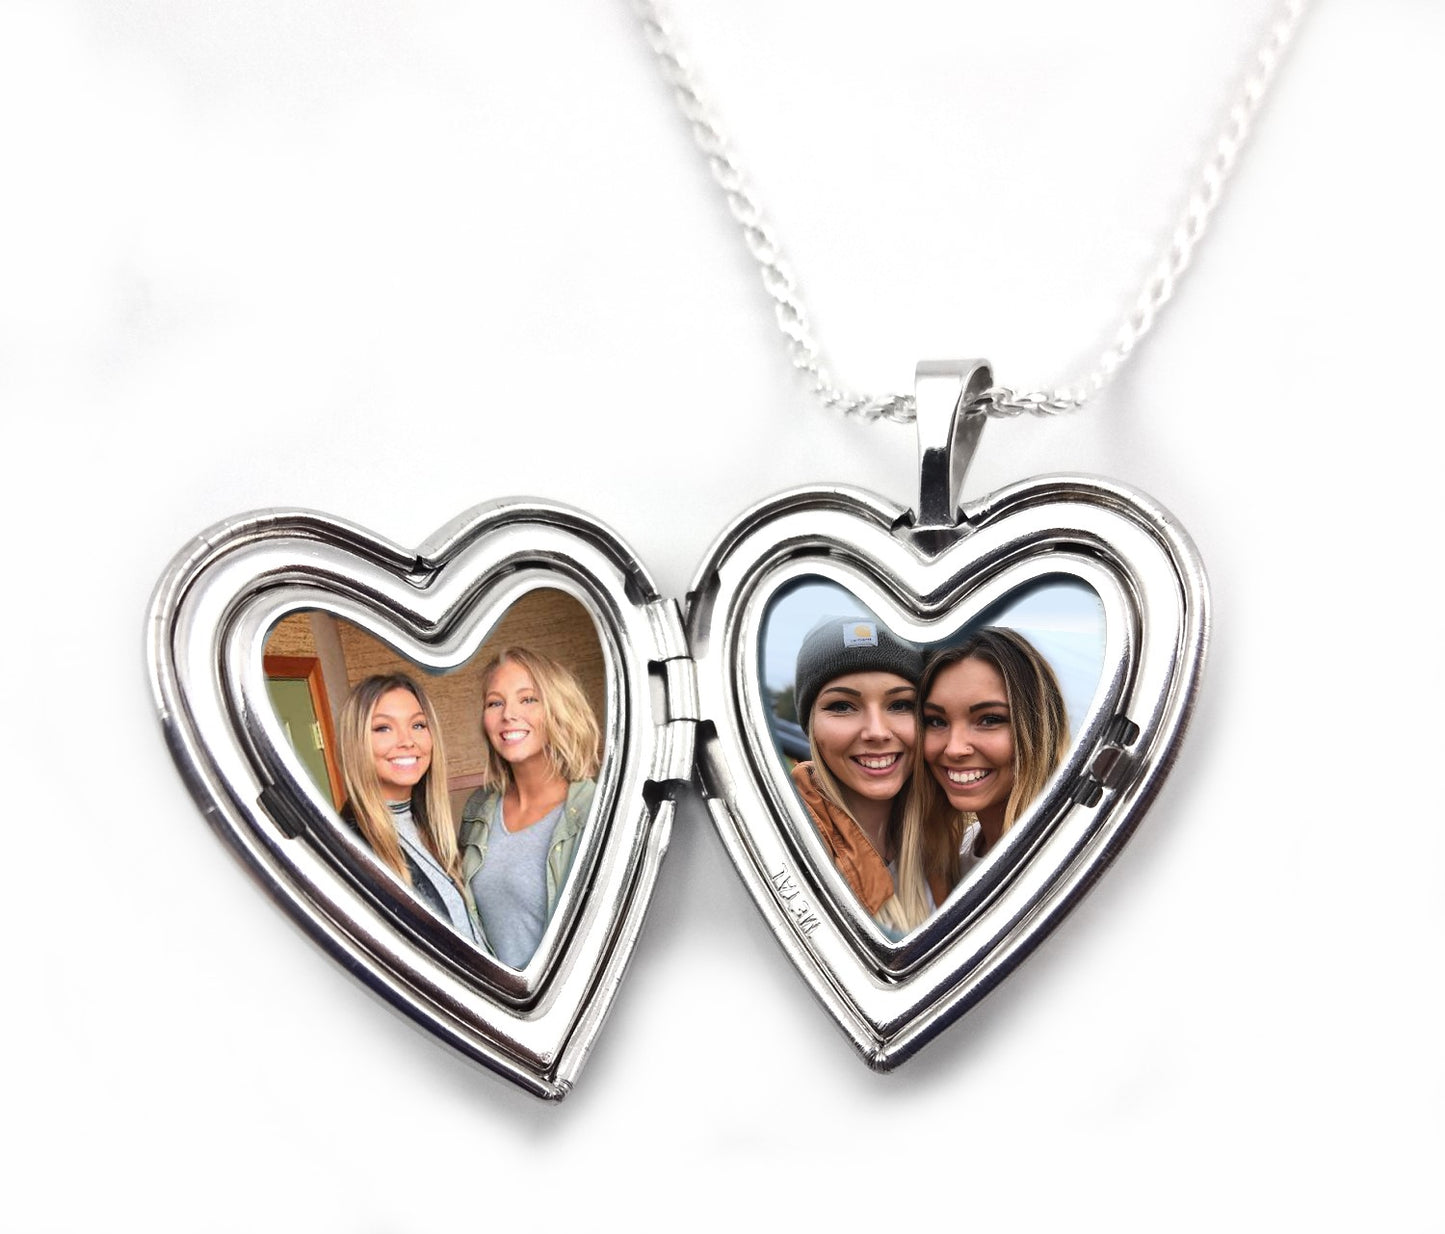 Custom Photo Heart Locket 925 STERLING SILVER w/ optional Engraving on Front and Back - Picture Charm Necklace -  In Memory Memorial Jewelry